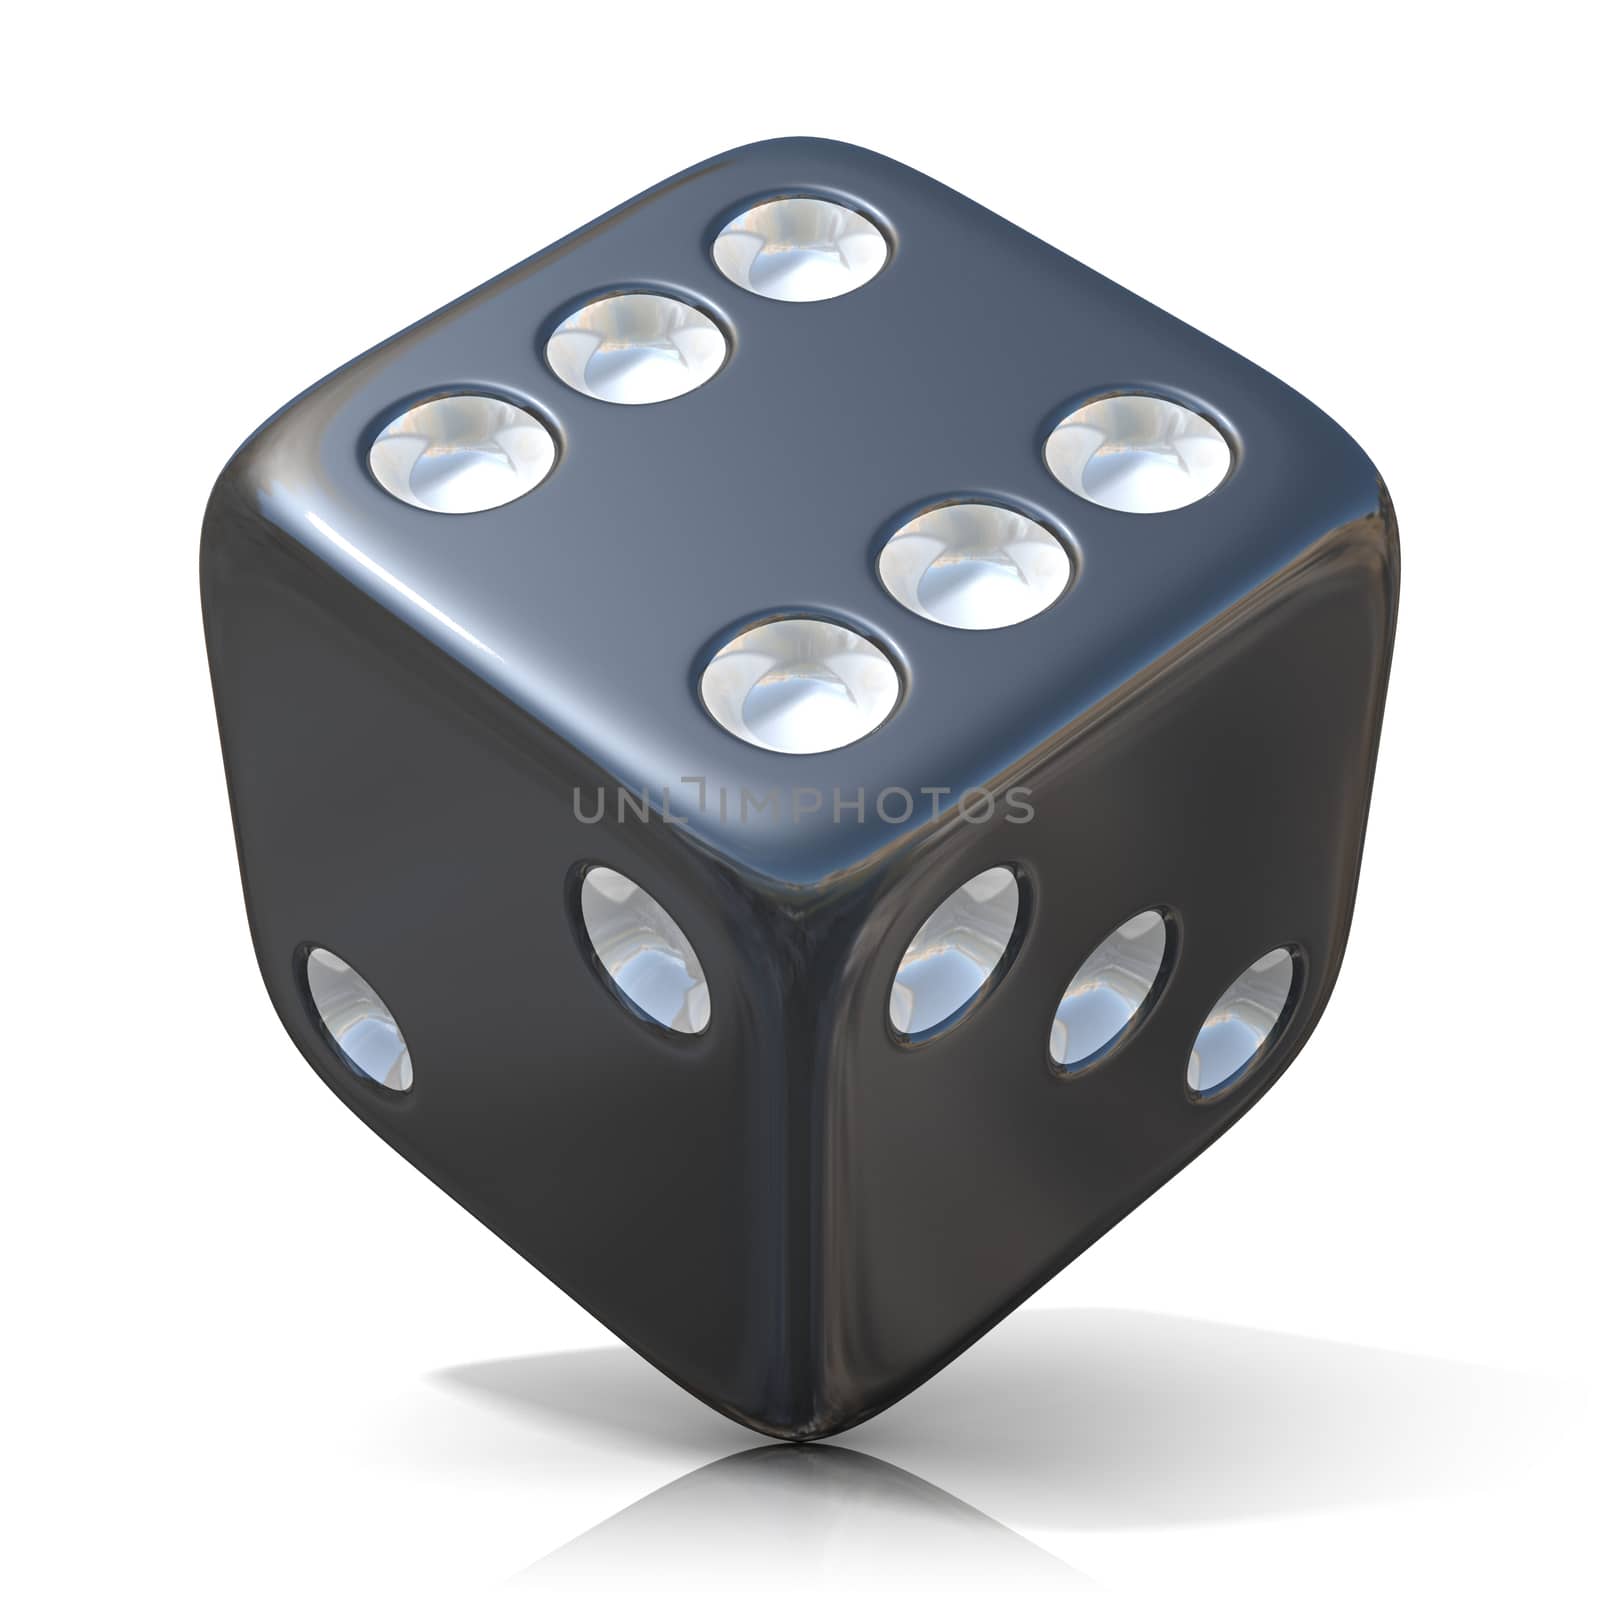 Black game dice by djmilic